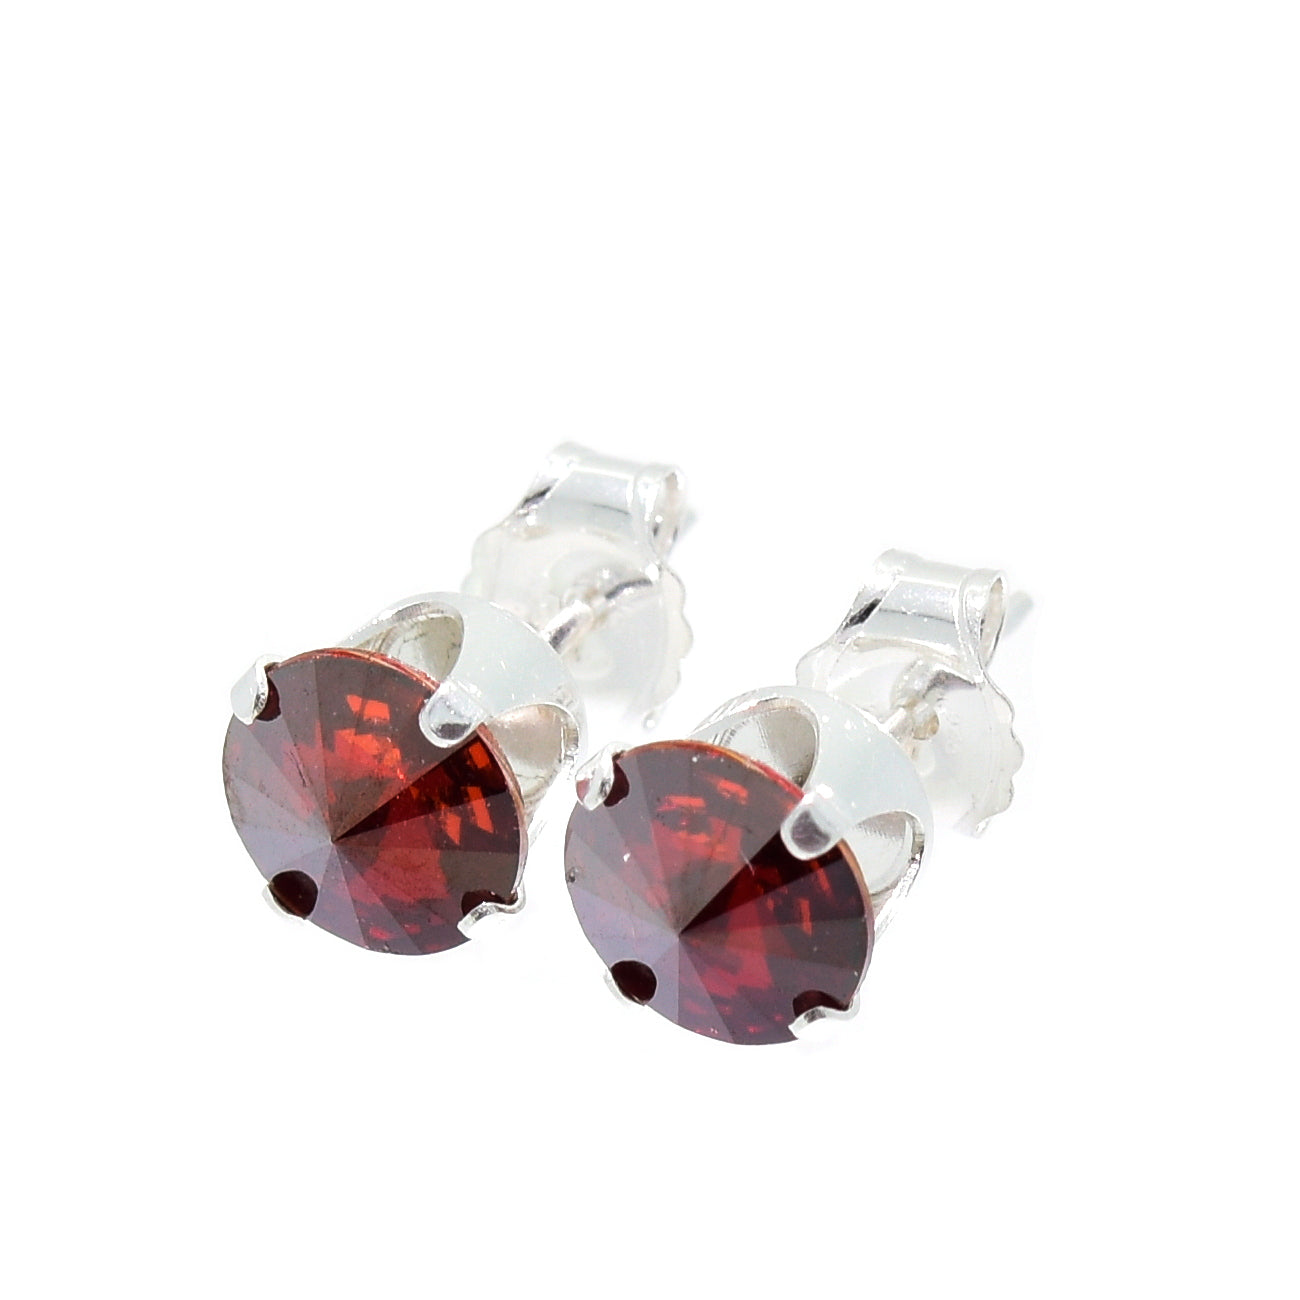 pewterhooter® Women's Classic Collection 925 Sterling silver earrings with brilliant Red Magma crystals, packaged in a gift box for any occasion.